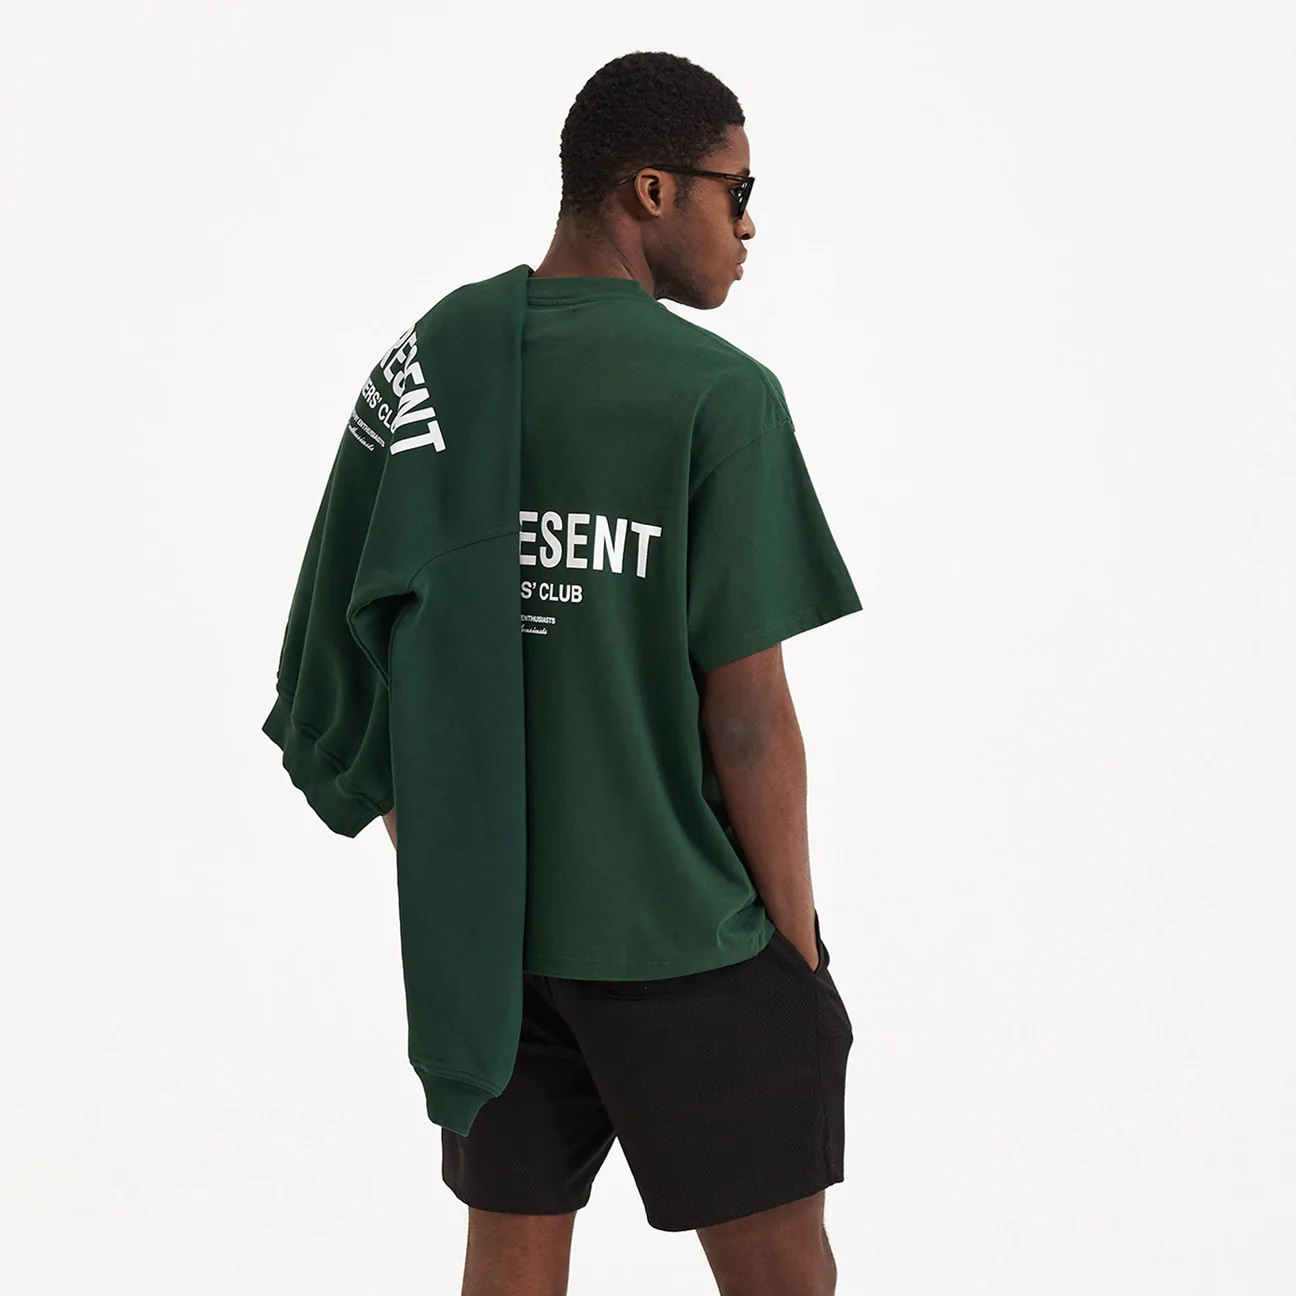 Represent Owners Club T-Shirt in Racing Green M